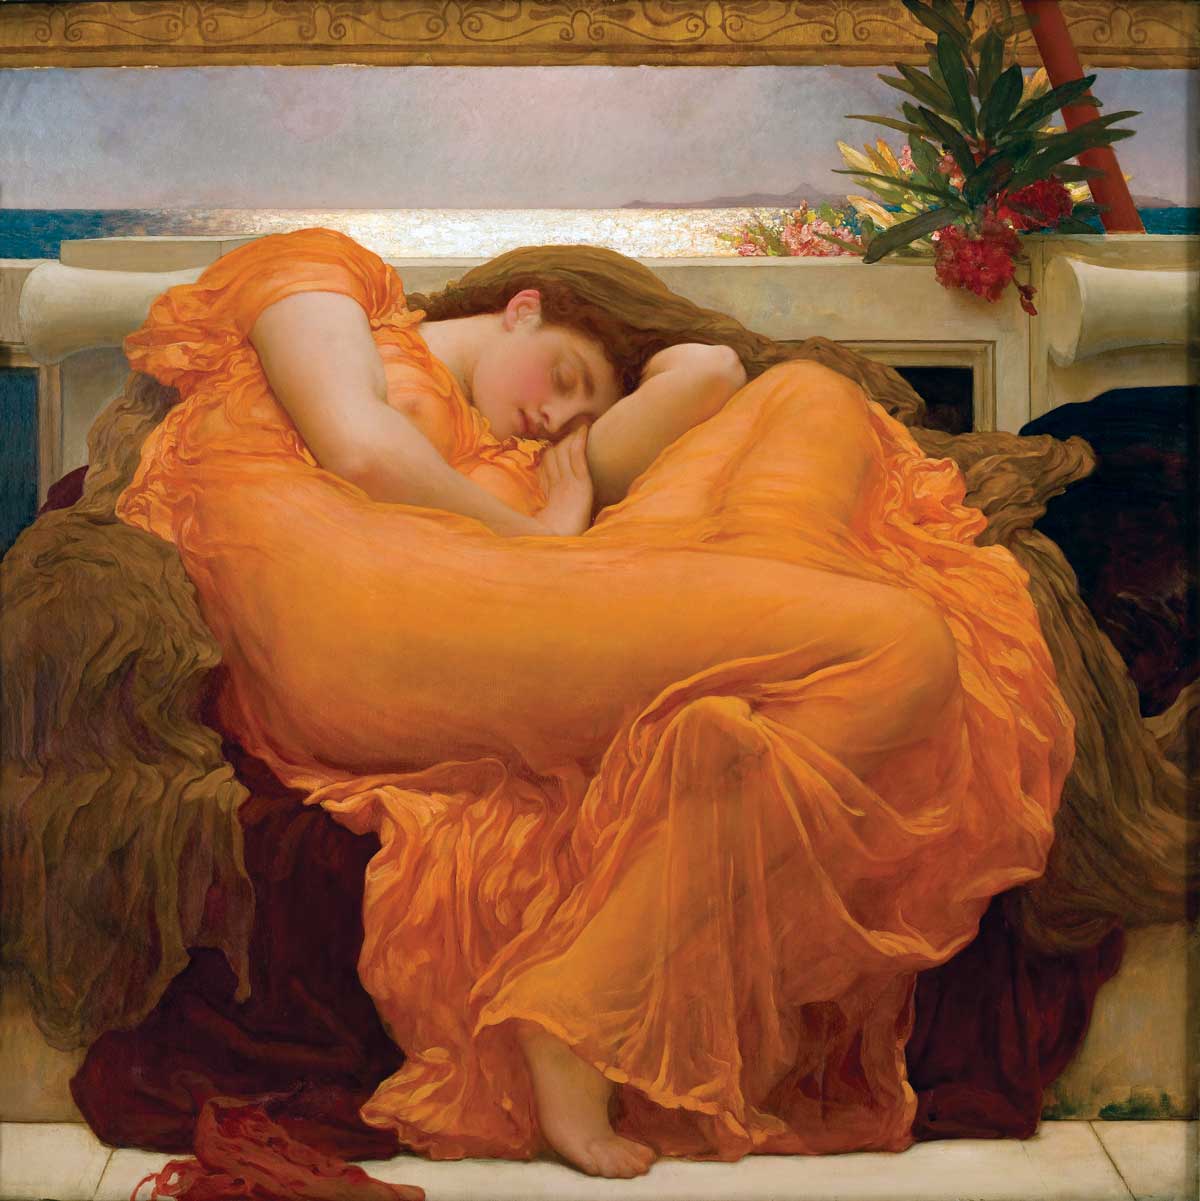 Flaming June, by Frederic Leighton, 1895, Museo de Arte de Ponce, Puerto Rico. Courtesy Wikimedia/Creative Commons.